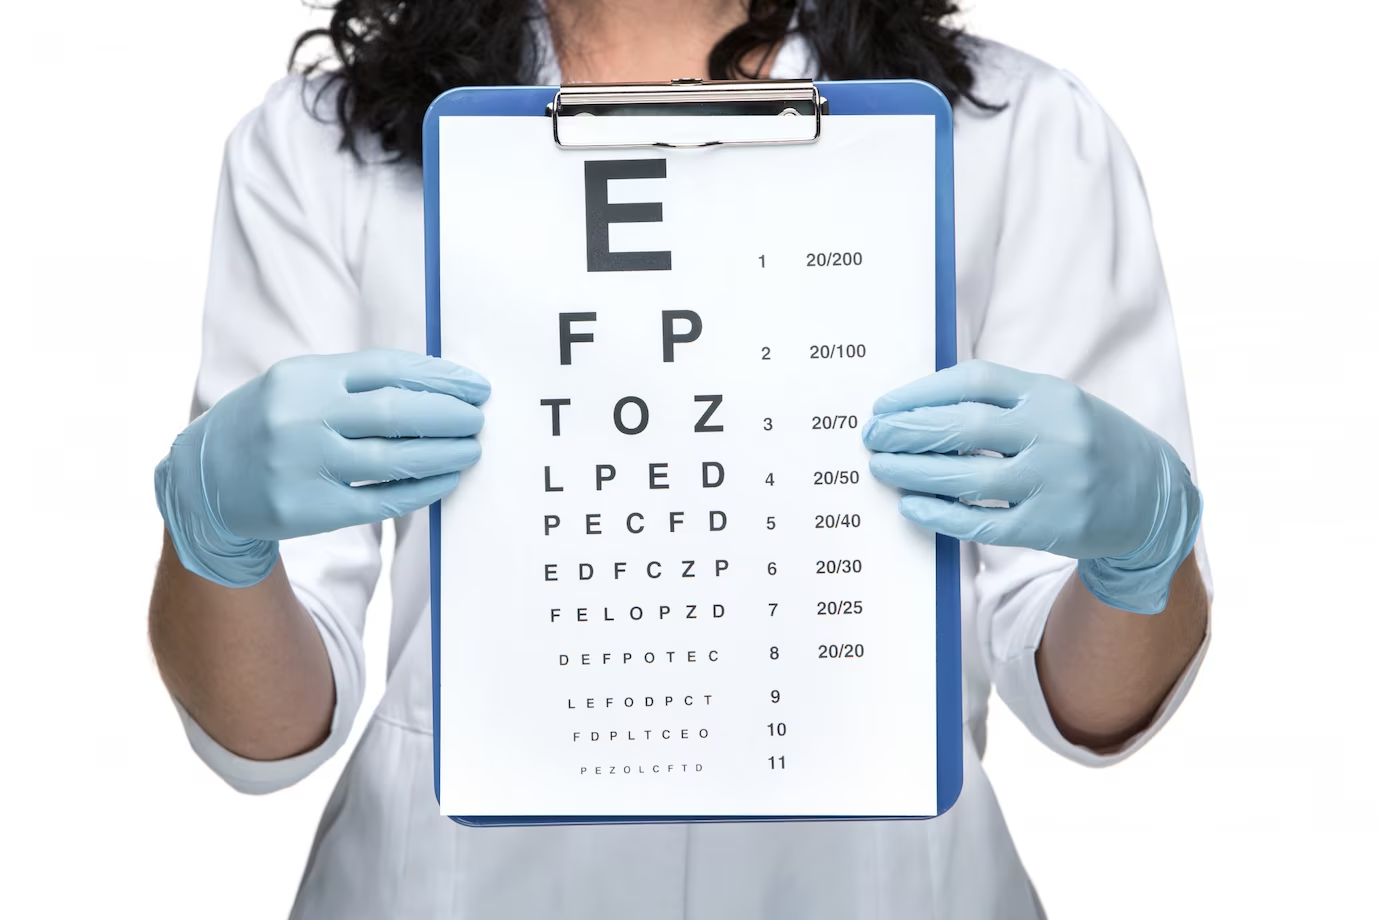 A female ophthalmologist holding an eye chart in a medical setting.